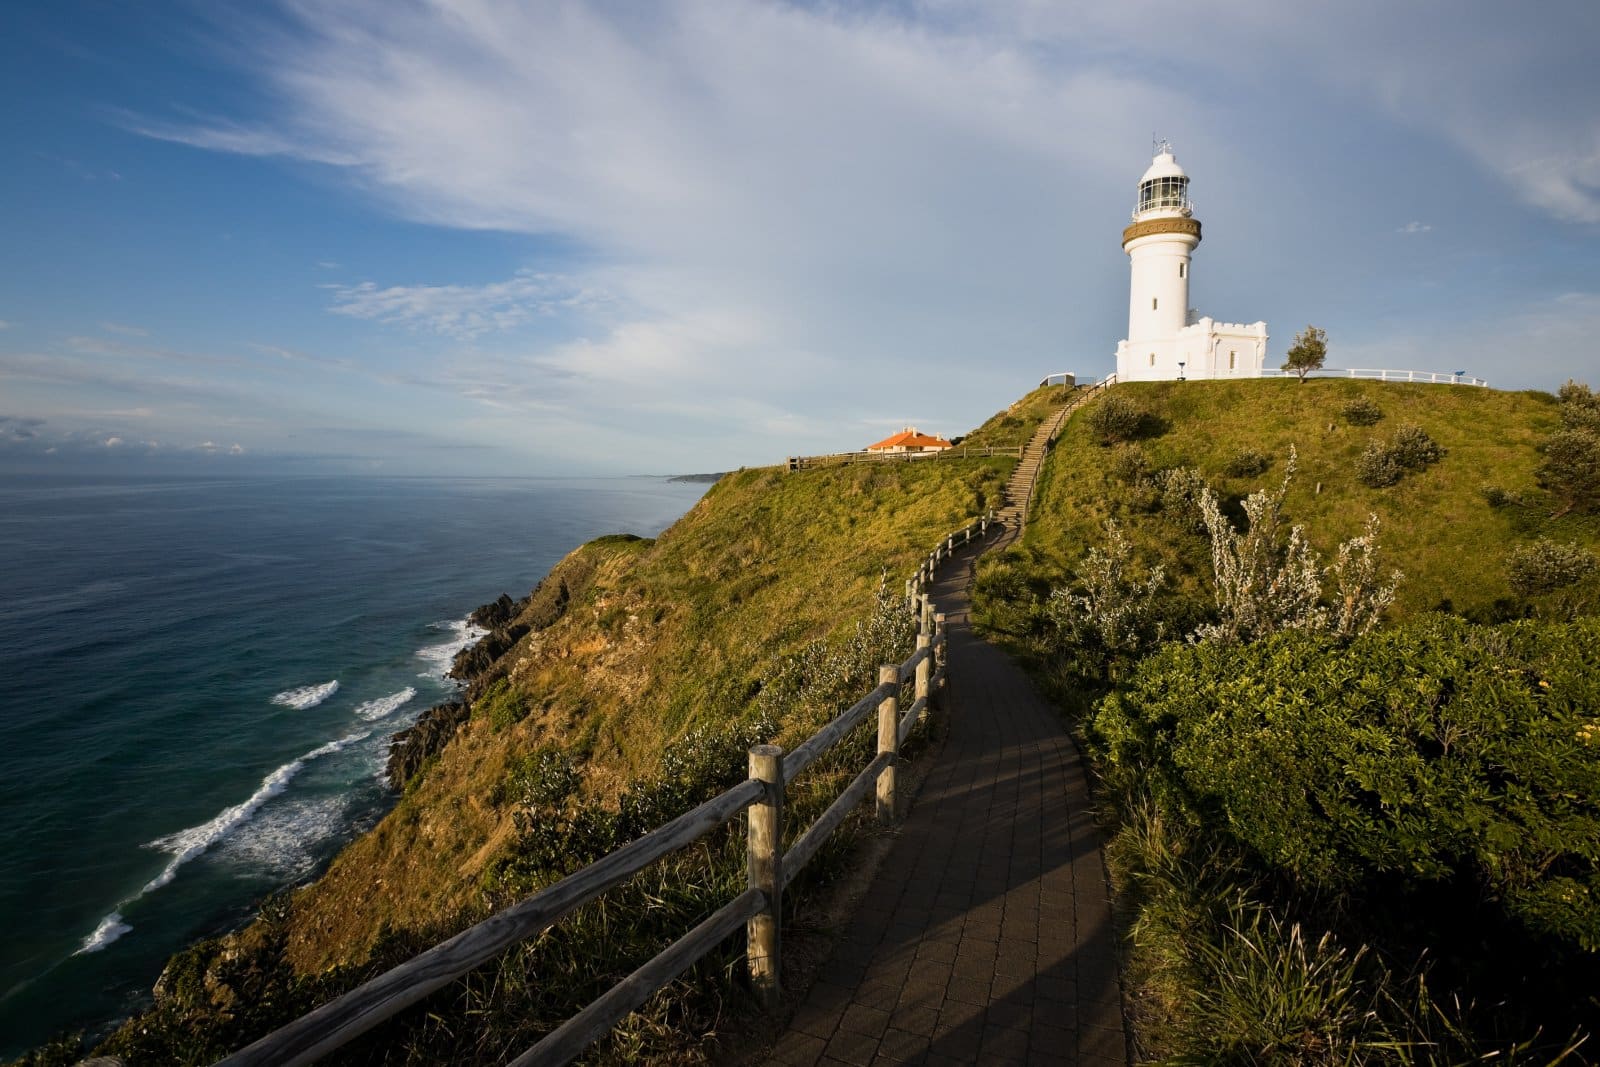 <p class="wp-caption-text">Image Credit: Shutterstock / John White Photos</p>  <p><span>Byron Bay is a coastal town in New South Wales, famous for its stunning beaches, surf spots, and laid-back lifestyle. It’s a magnet for those seeking a blend of natural beauty, vibrant arts scene, and alternative living. The town is surrounded by lush rainforests and coastal walks, including the iconic Cape Byron walking track, leading to the most easterly point of the Australian mainland and the historic Cape Byron Lighthouse. Byron Bay is also known for its wellness and spiritual retreats, offering a range of experiences from yoga and meditation to holistic therapies.</span></p>